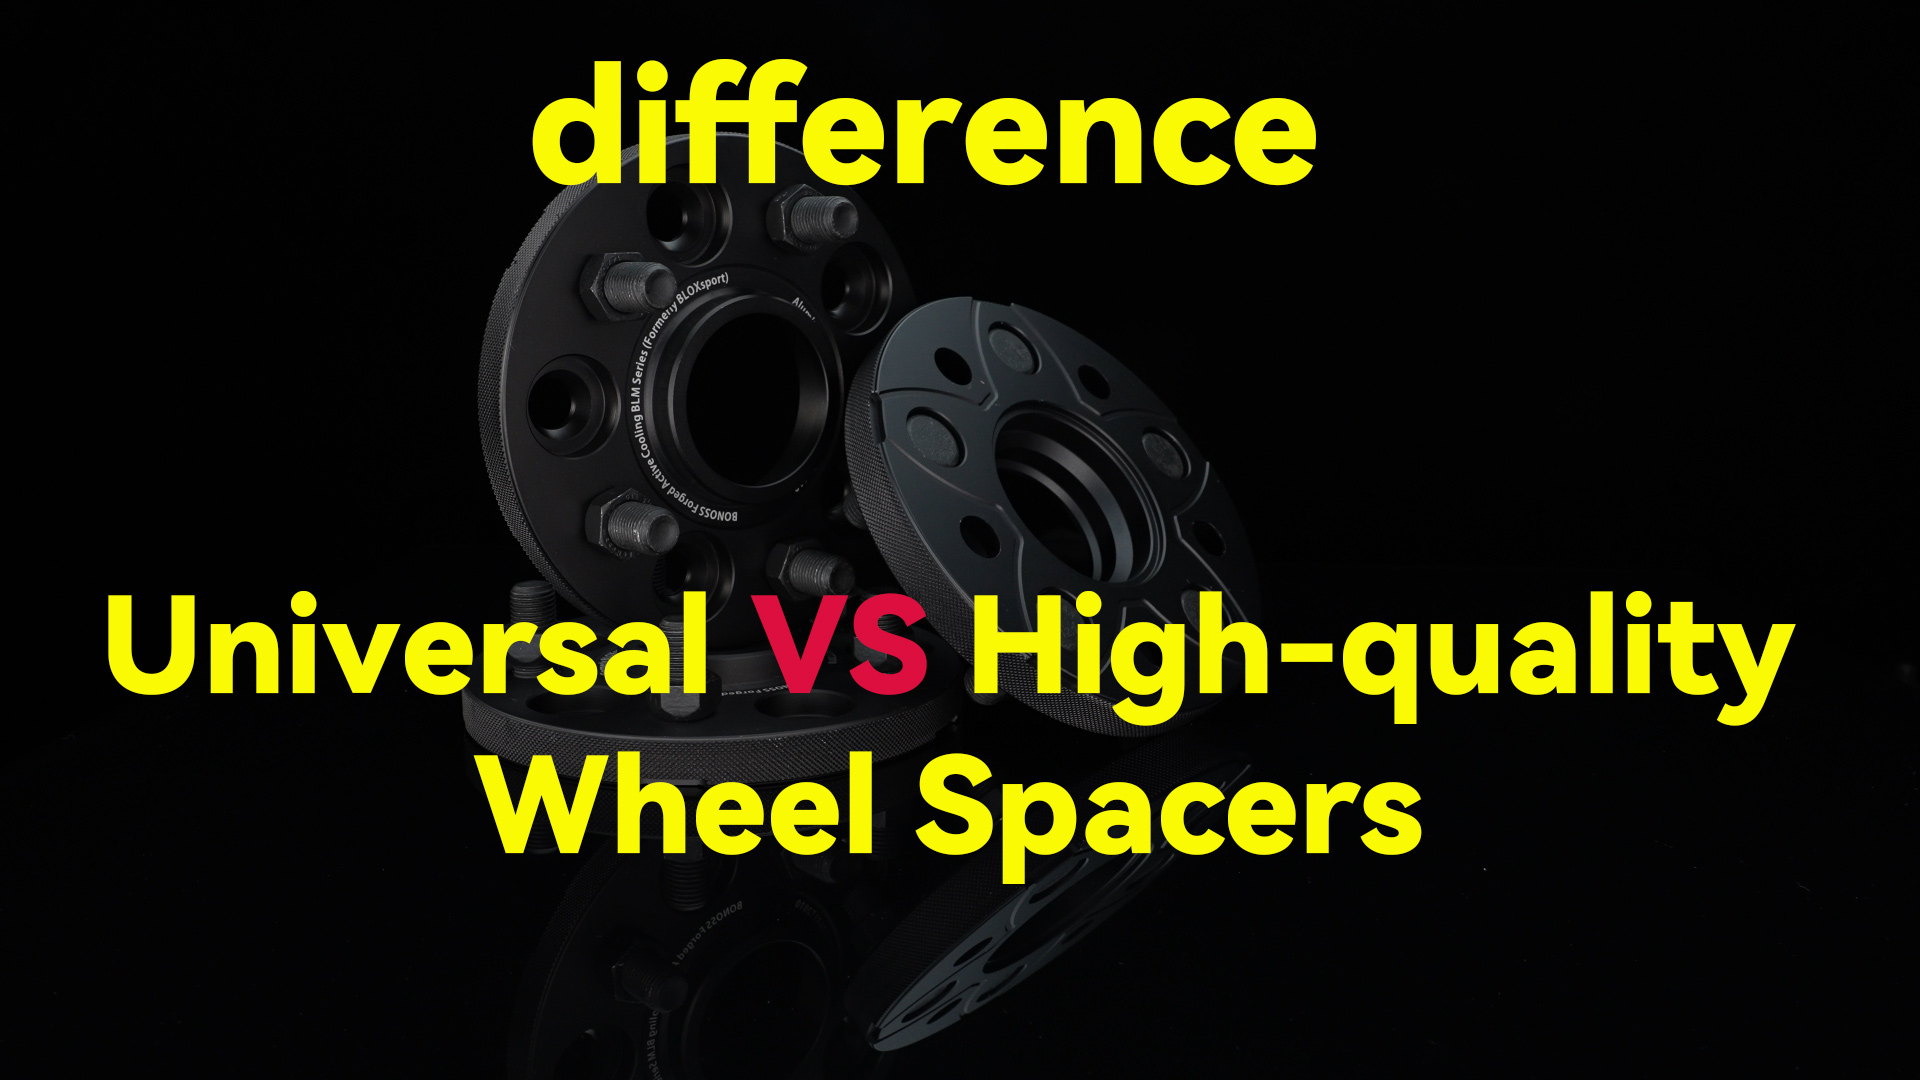 Wheel Spacers Differences Between Universal And High-quality-by Olina1